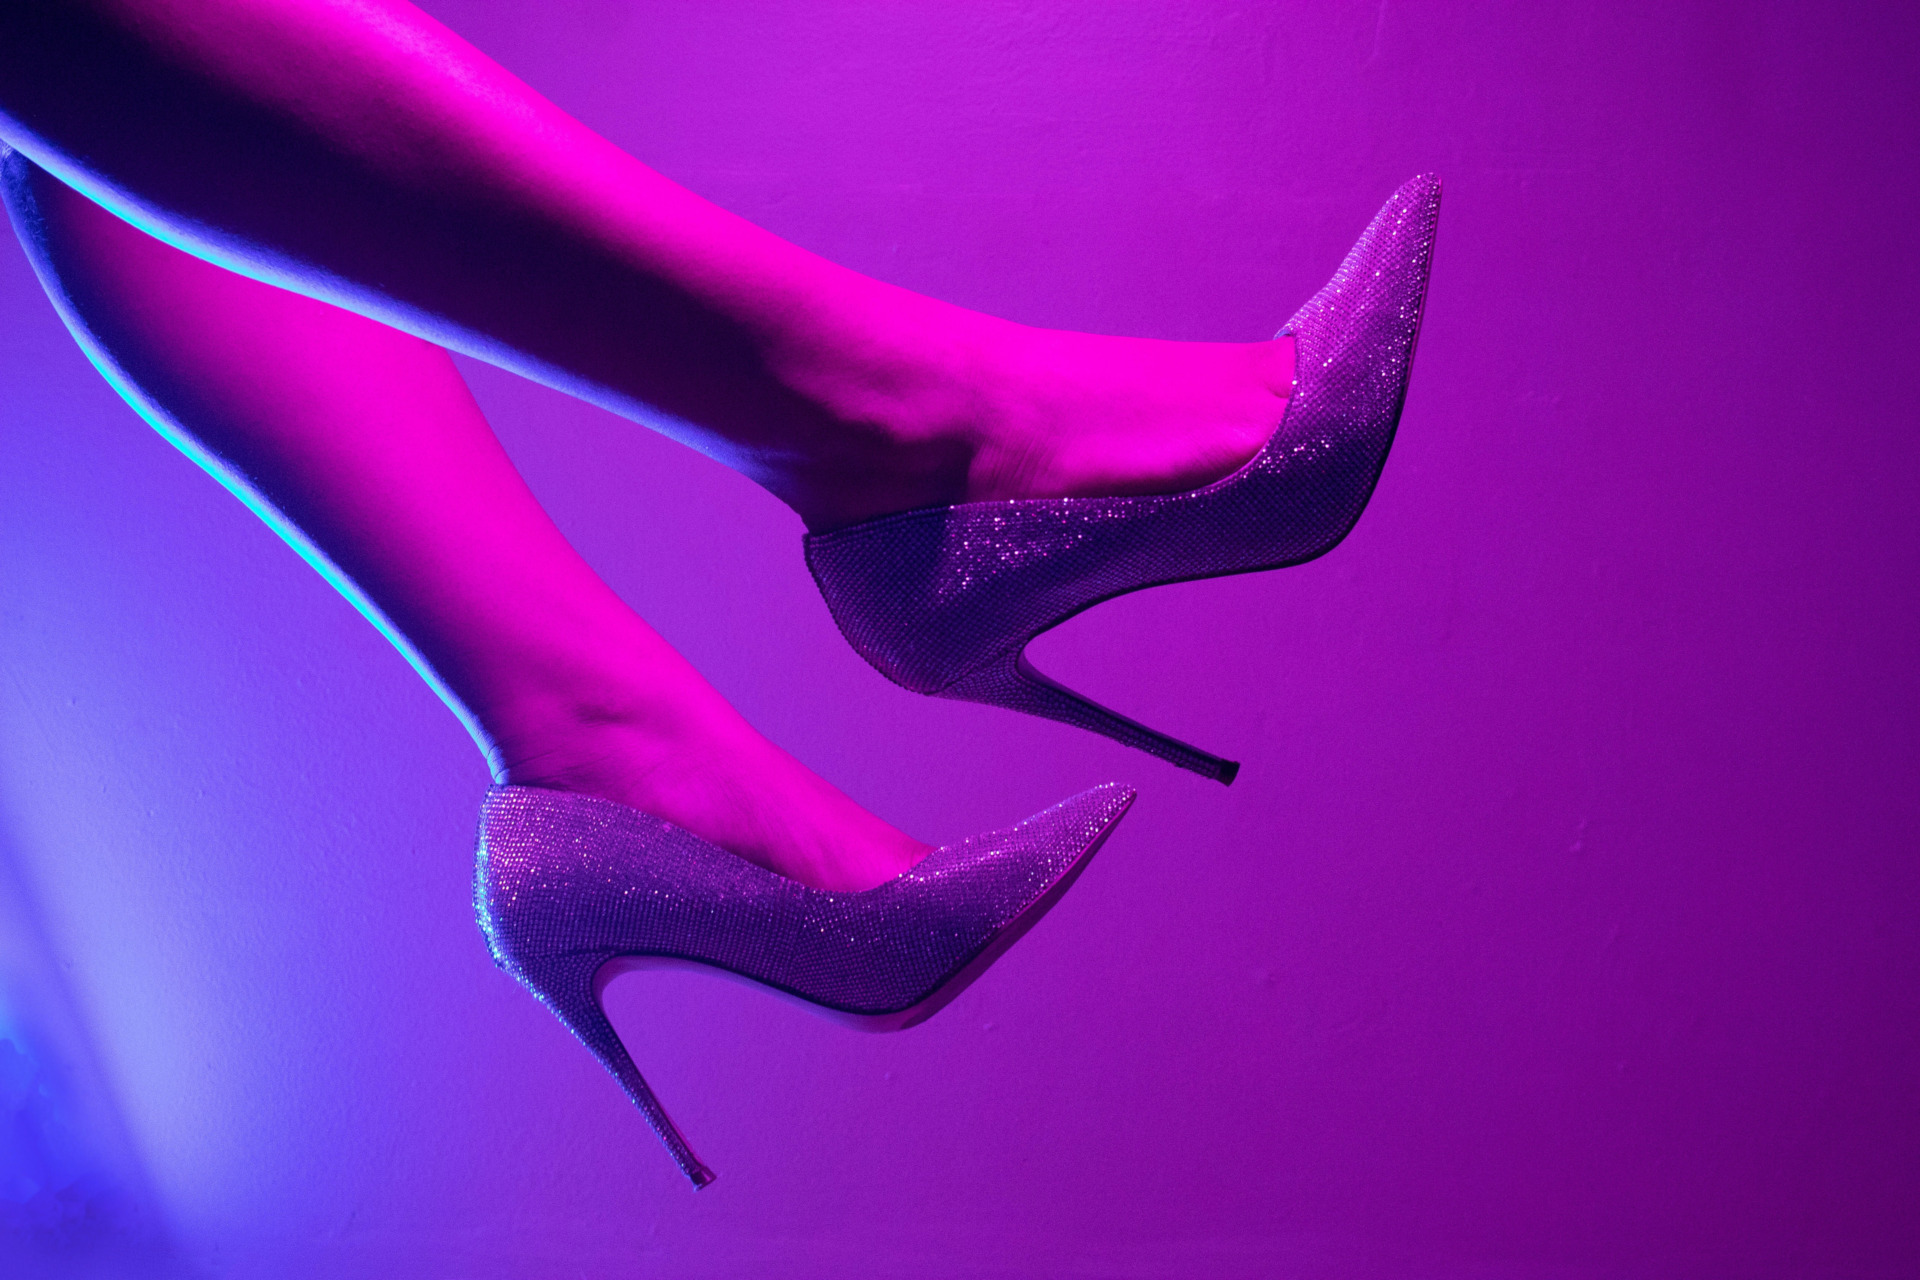 Close up of legs and feet wearing glittery shoes in purple light